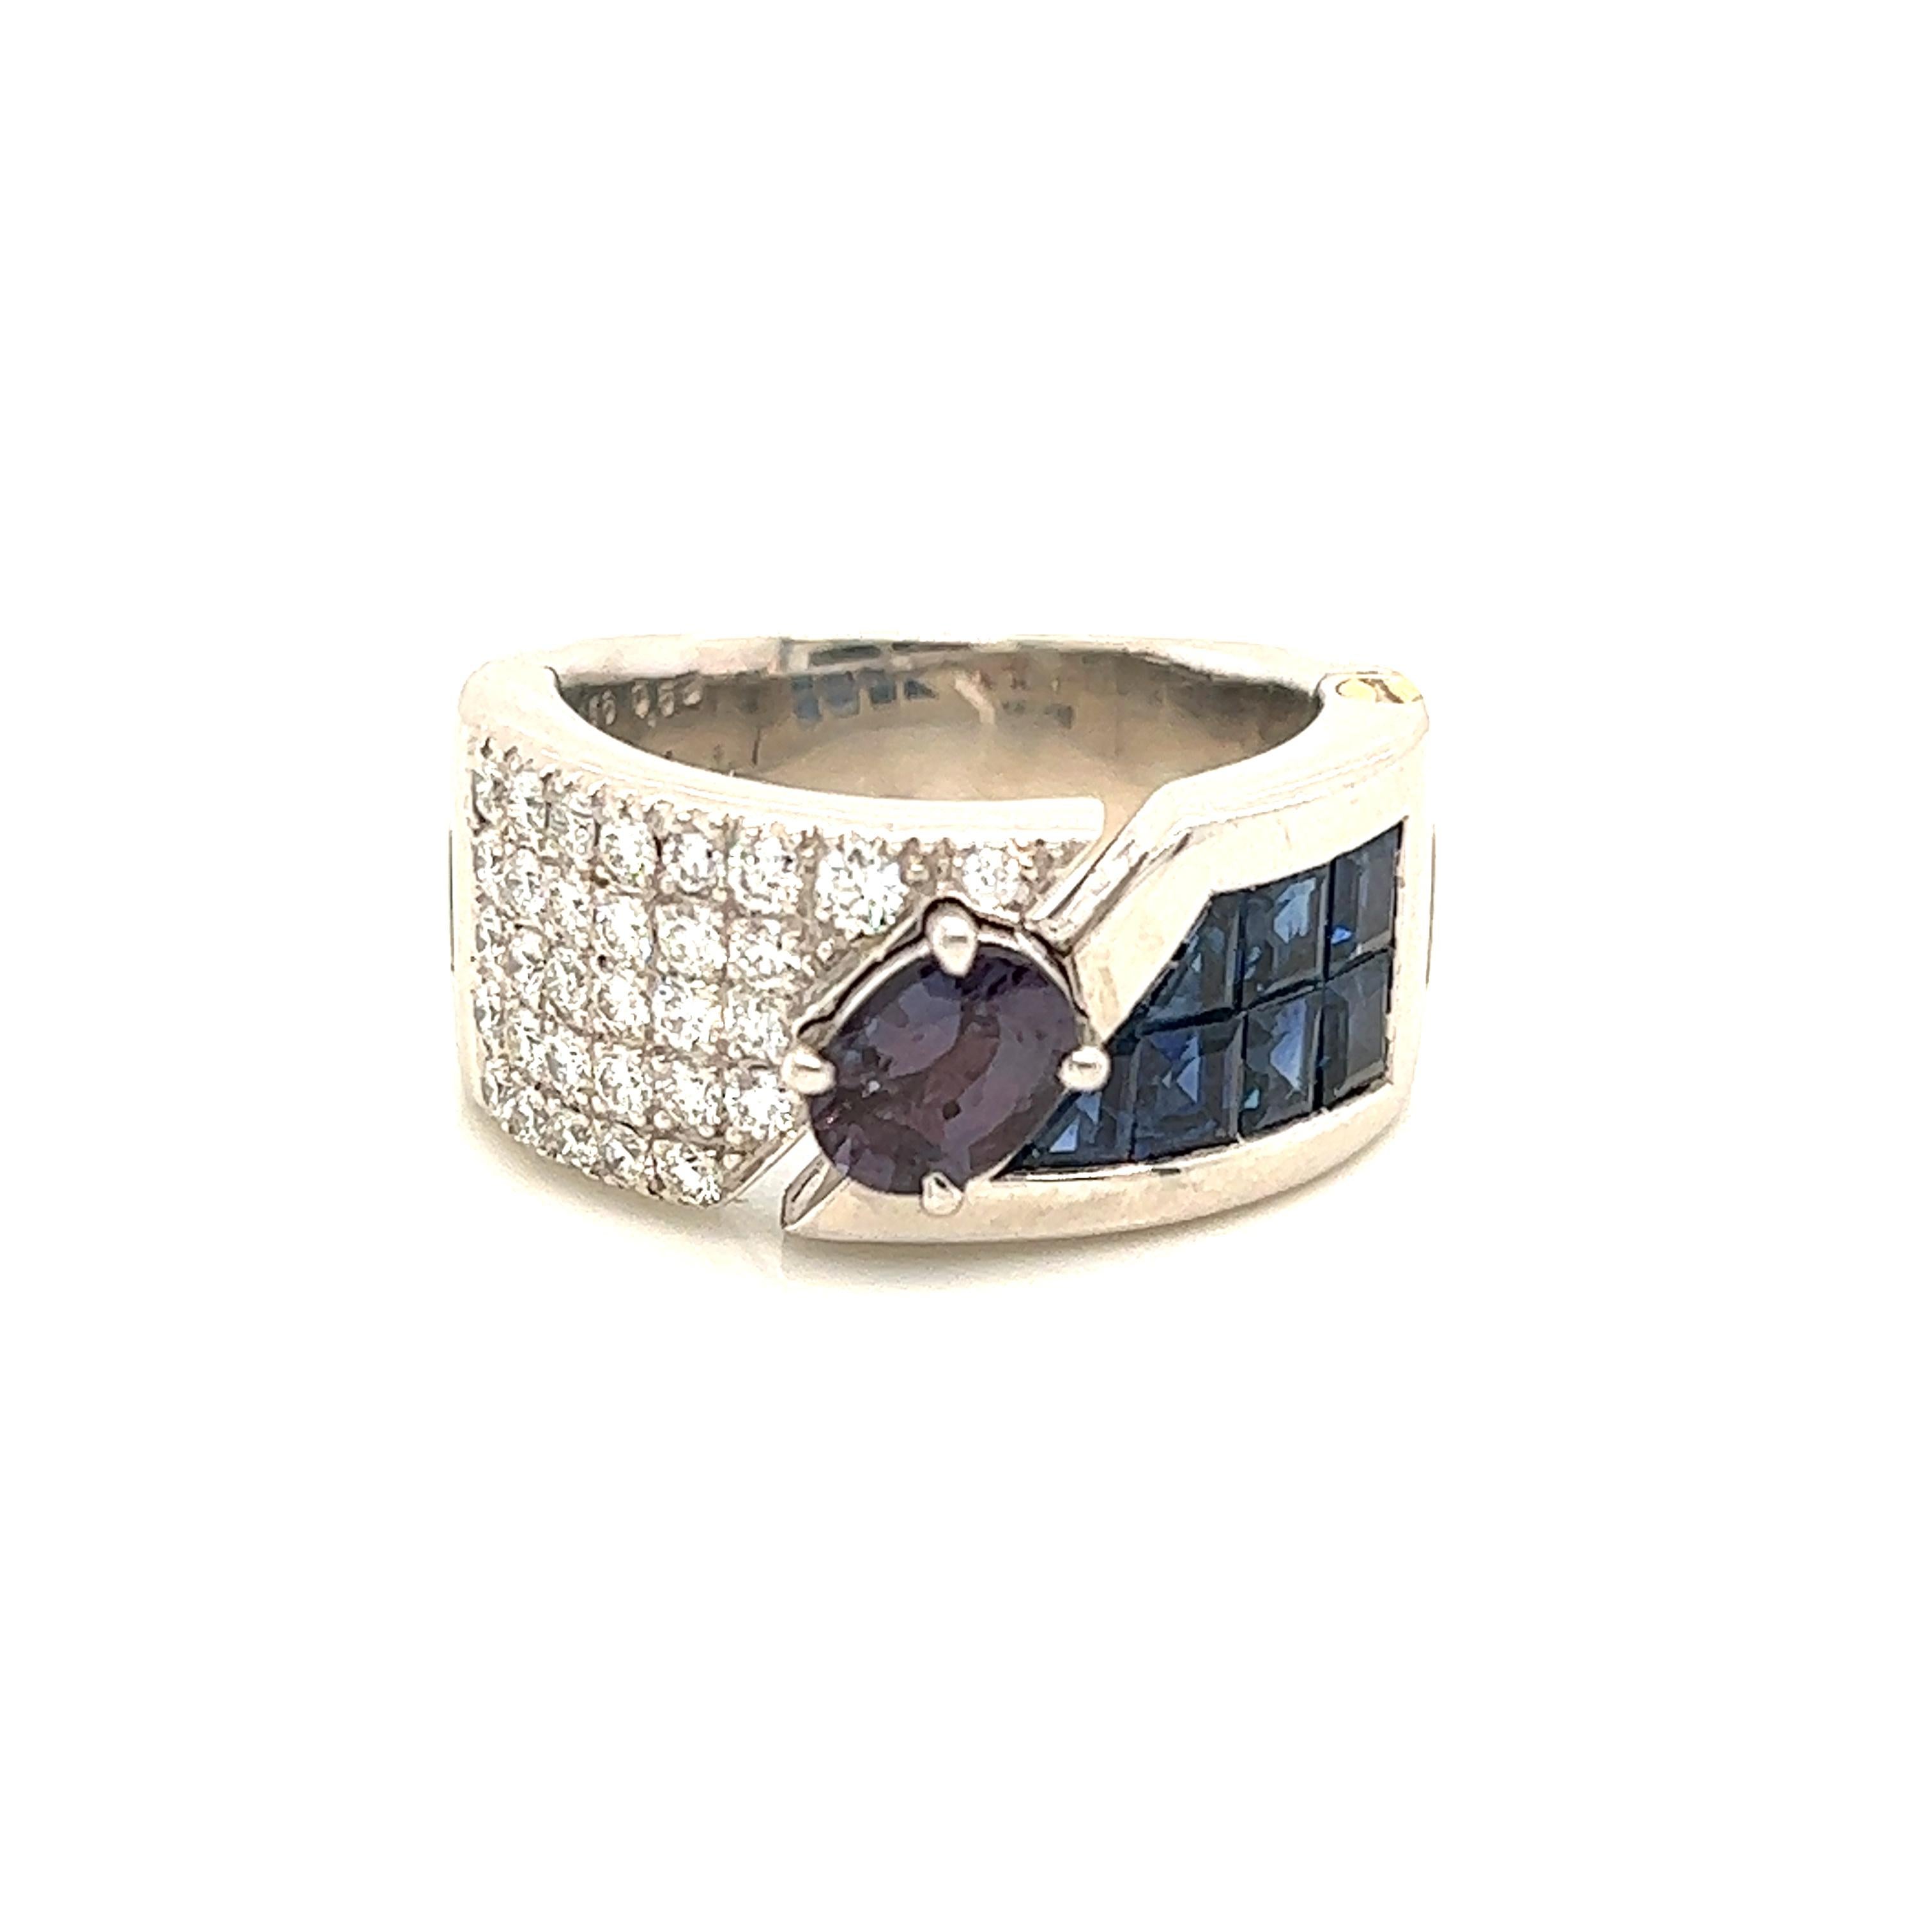 This is a gorgeous natural AAA quality oval Alexandrite surrounded by a dainty diamond halo that is set in a vintage platinum setting on one side and sapphire on the other side. This ring features a natural 1.69 oval alexandrite that is certified by